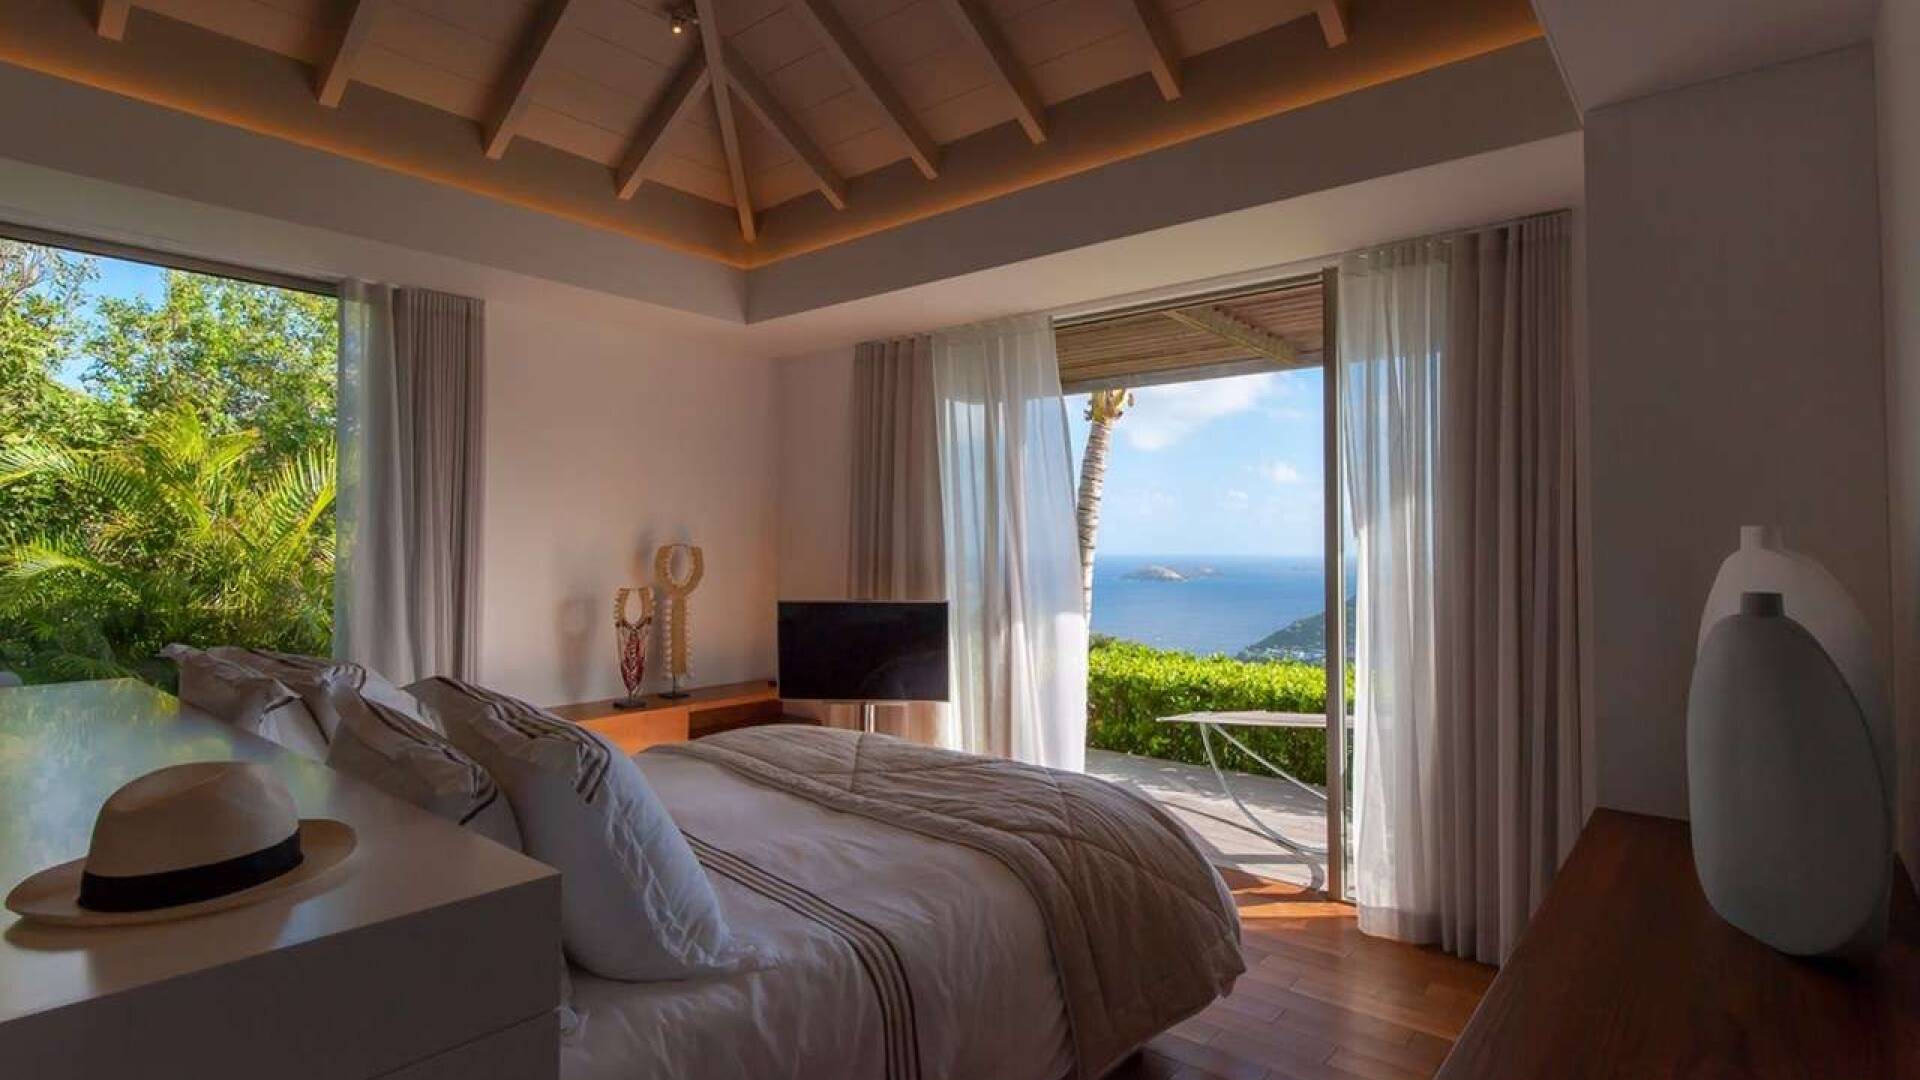 Bedroom at WV LNA, Colombier, St. Barthelemy